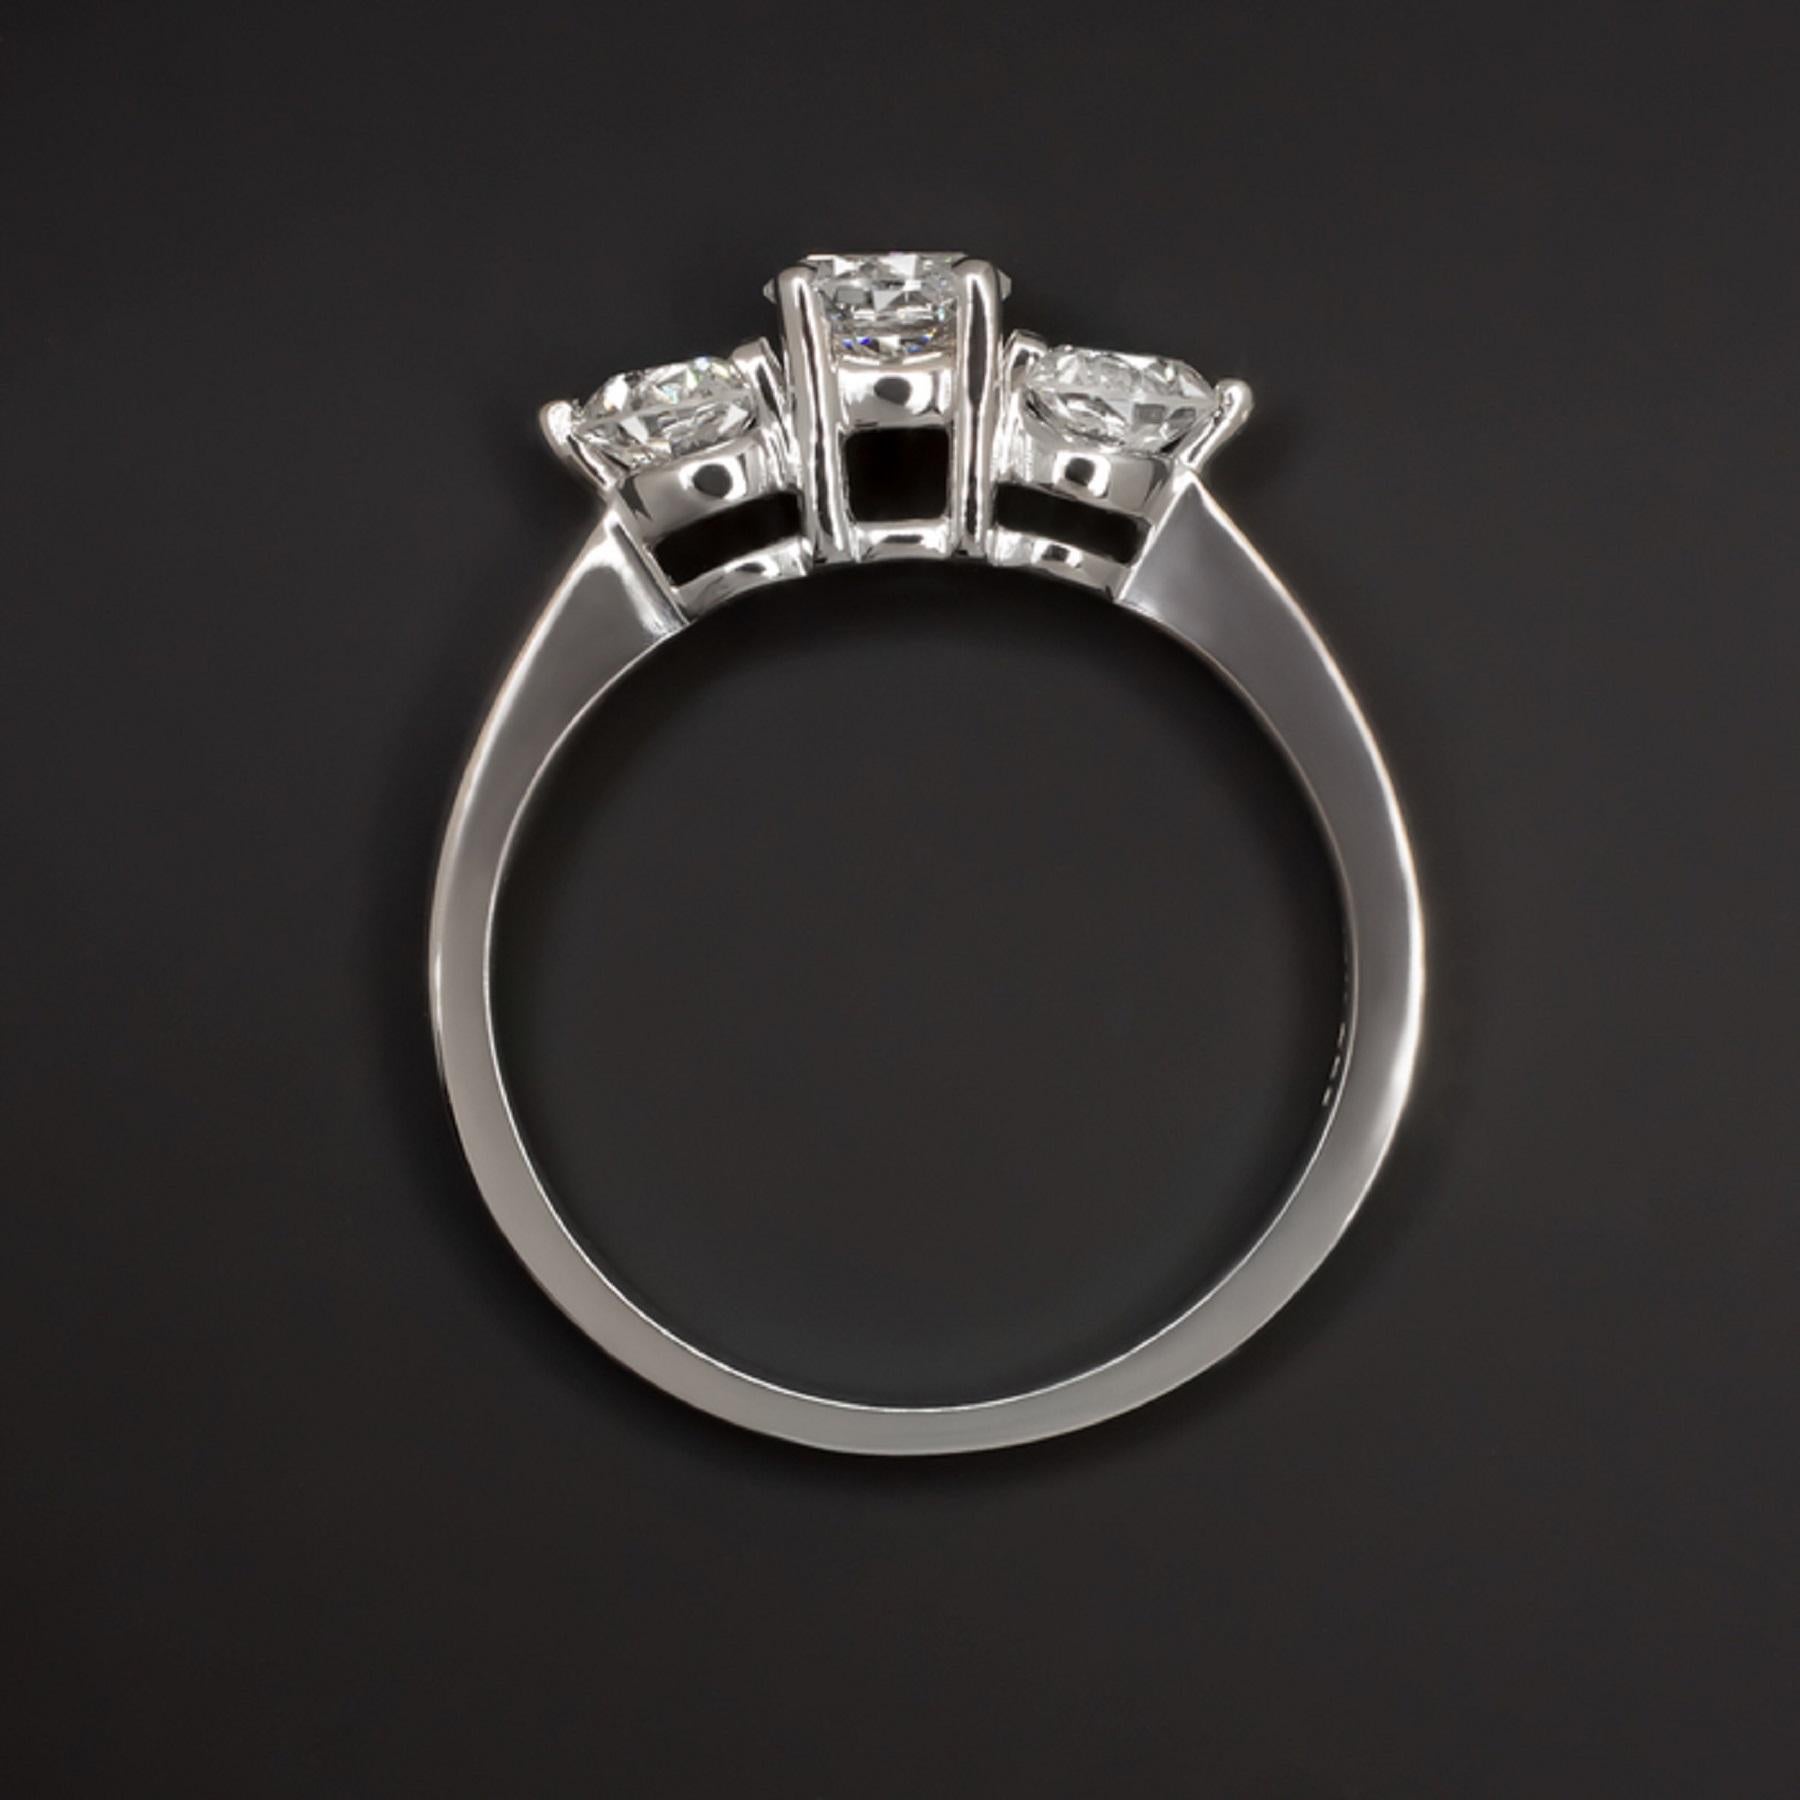 This gorgeous diamond engagement ring combines striking sparkle with an eternally stylish design. 

The 0.47 carat center diamond is completely eye clean, colorless, and ideal cut with a stunning play of light. It is flanked by two more excellent